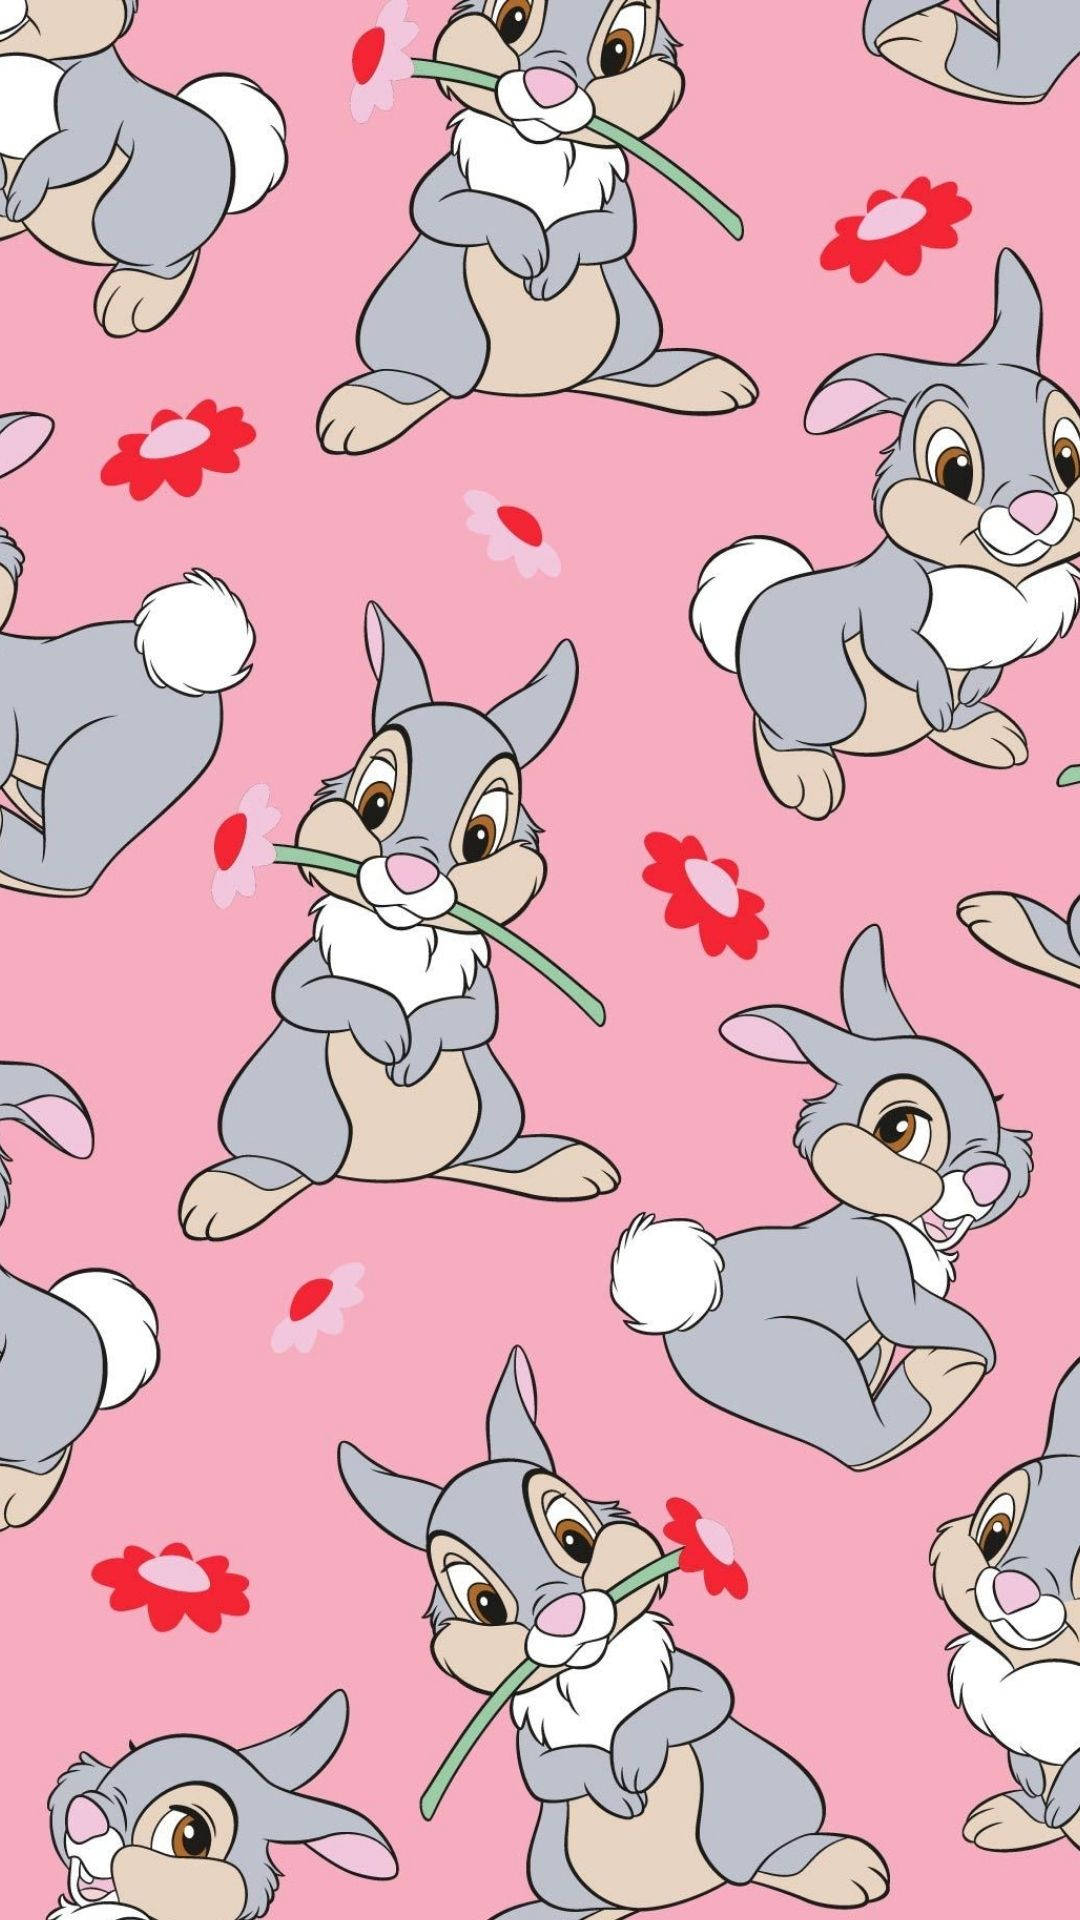 Thumper And Flowers Pattern Wallpaper